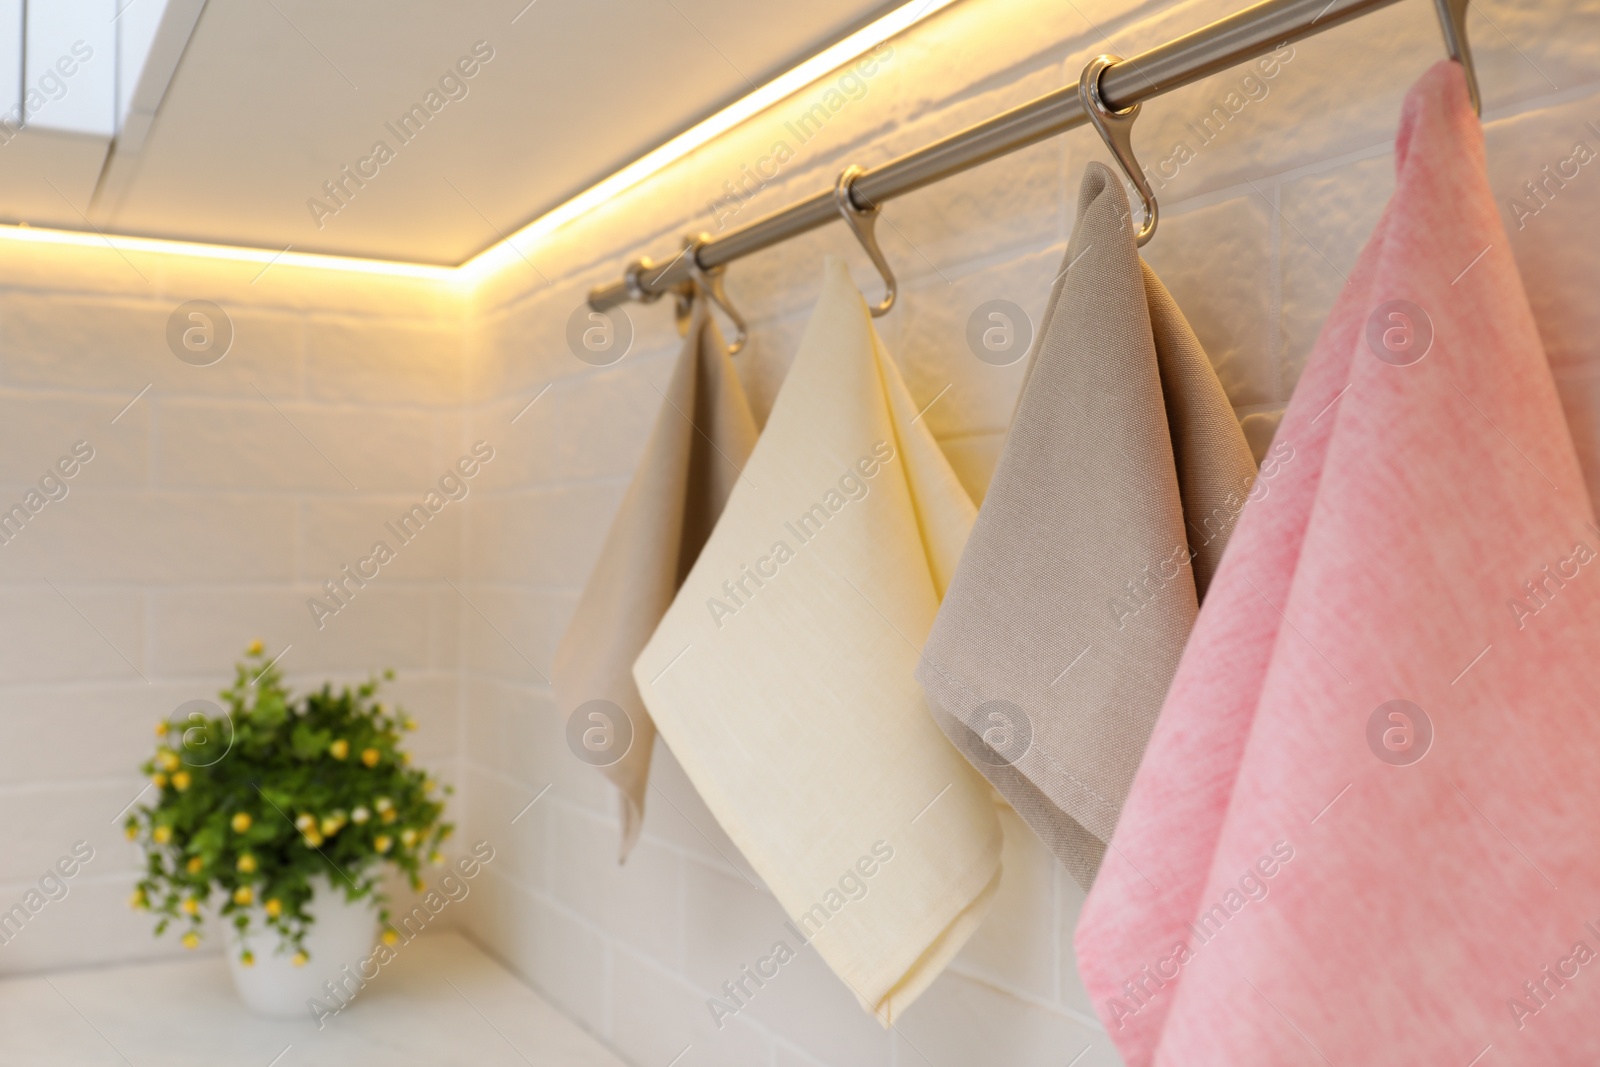 Photo of Clean kitchen towels hanging on wall indoors, closeup